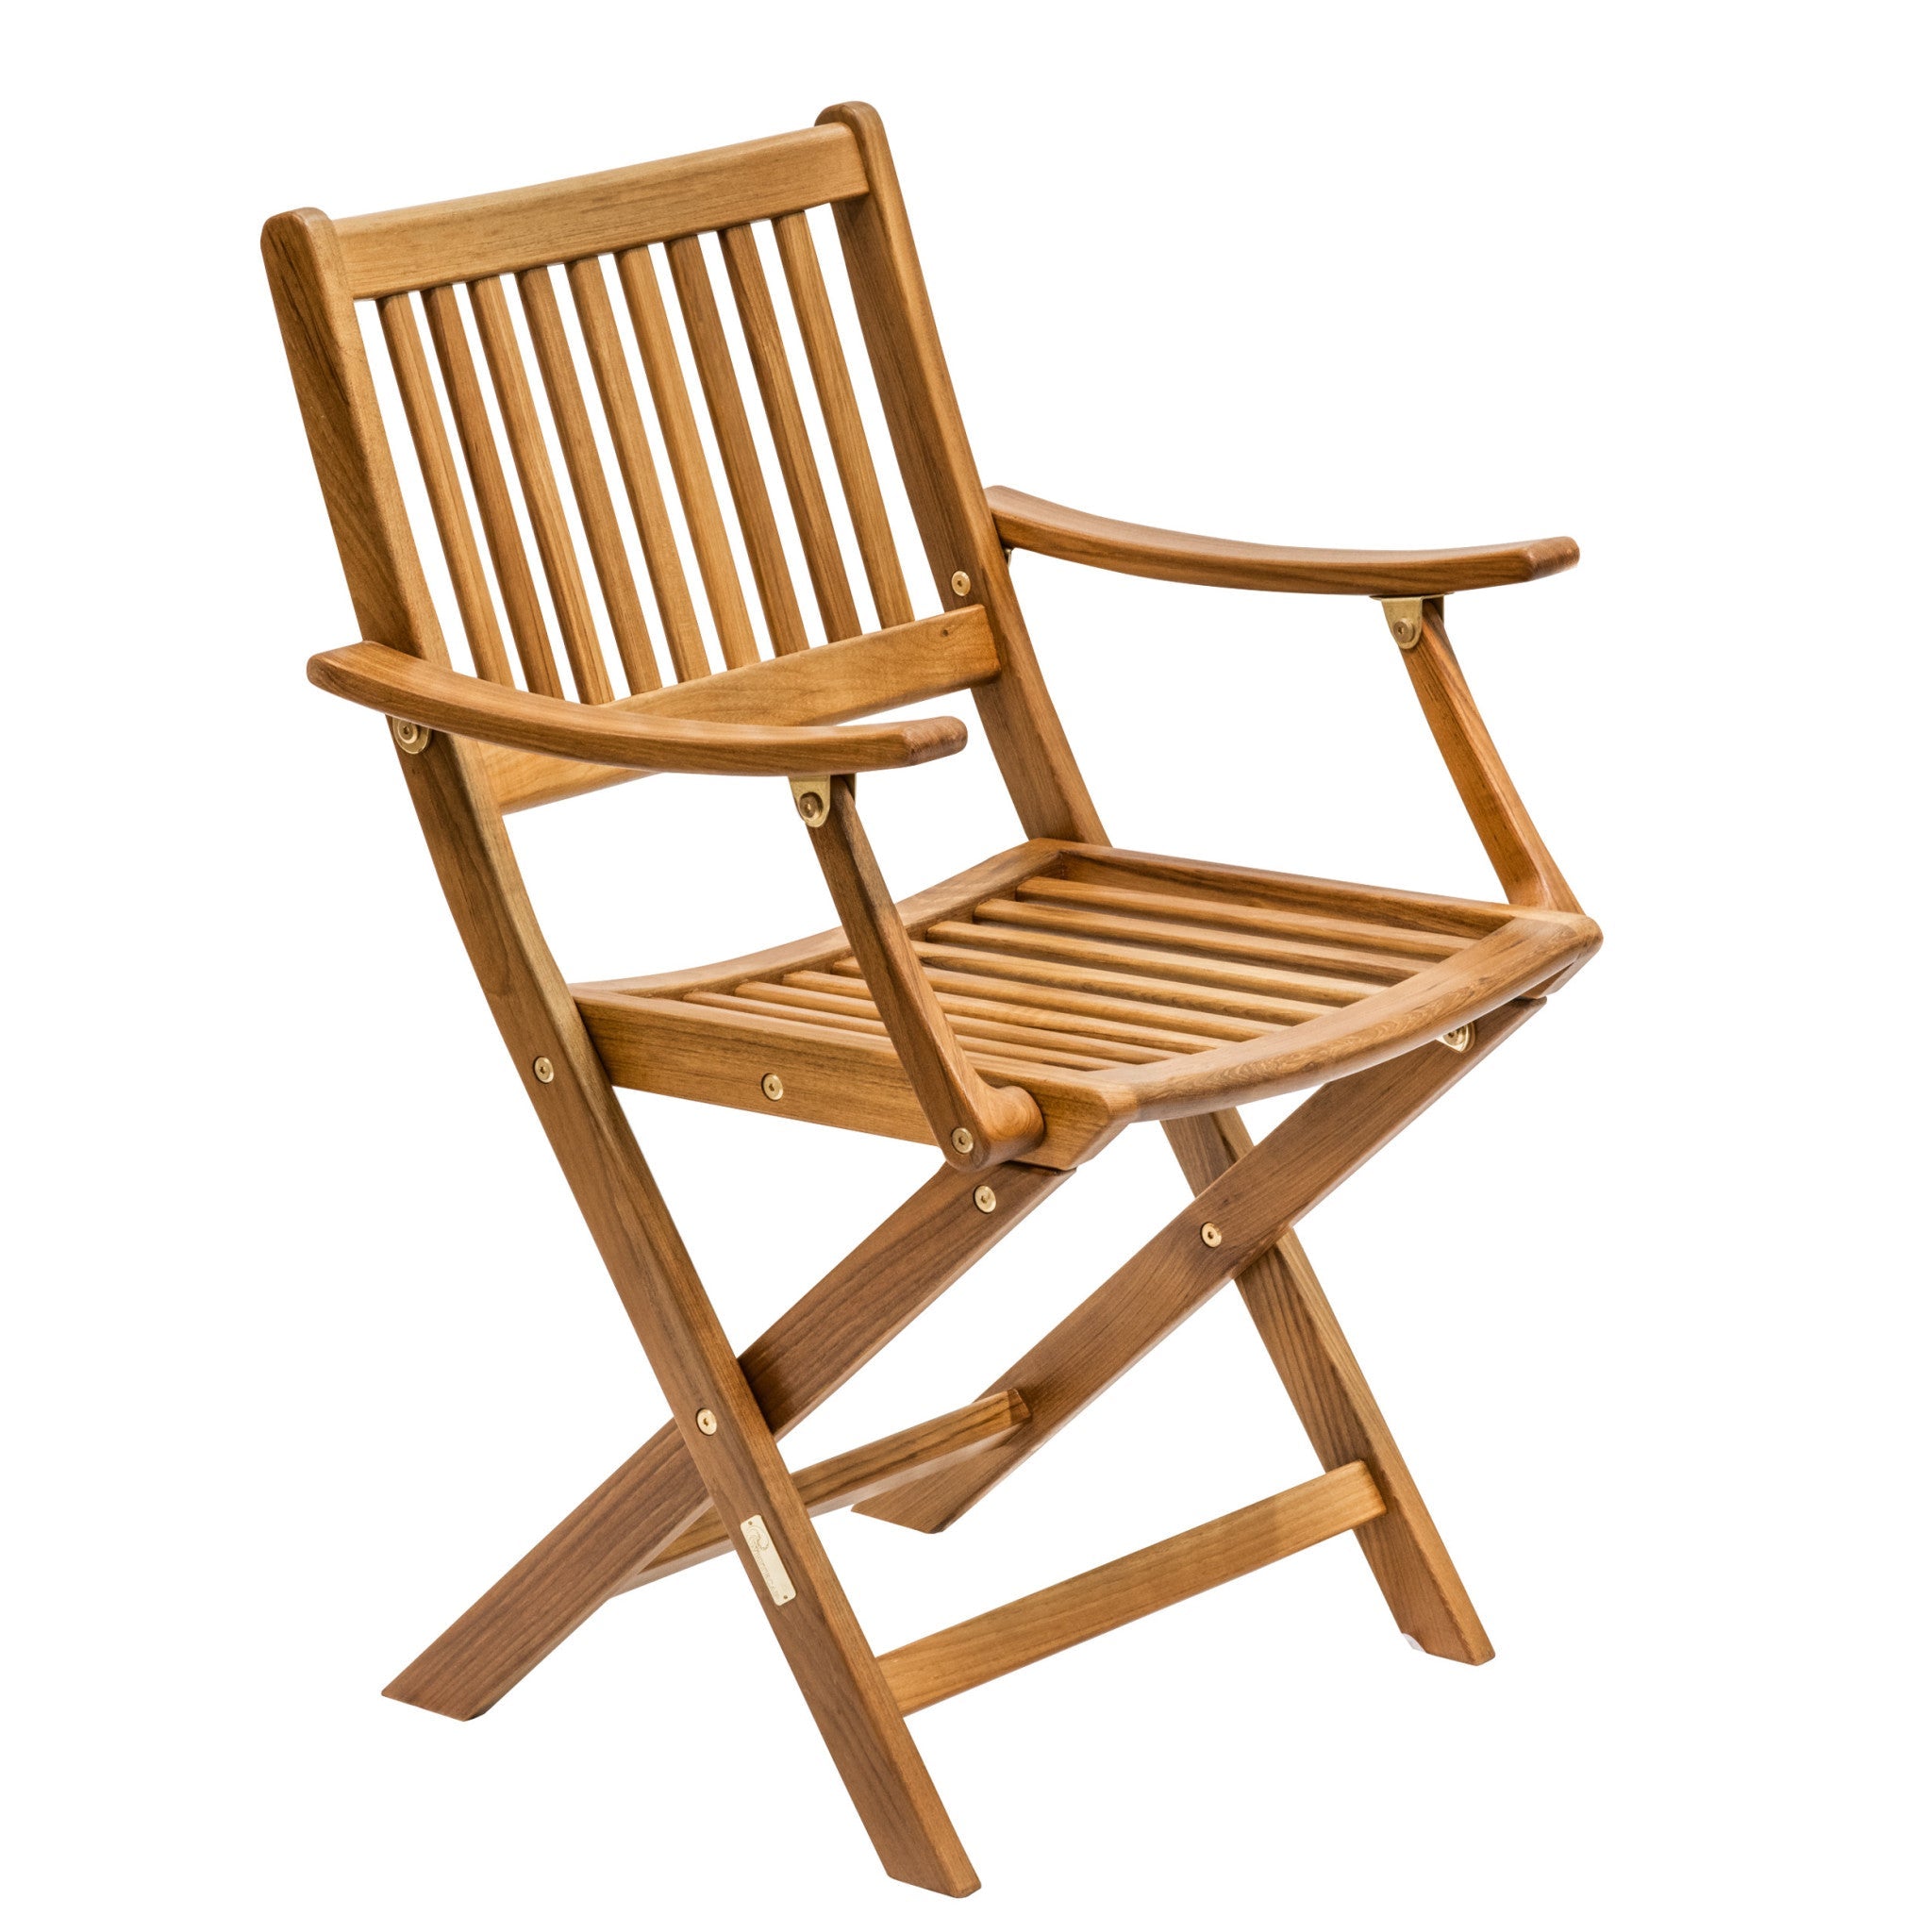 Brown-Solid-Wood-Deck-Chair-Outdoor-Chairs